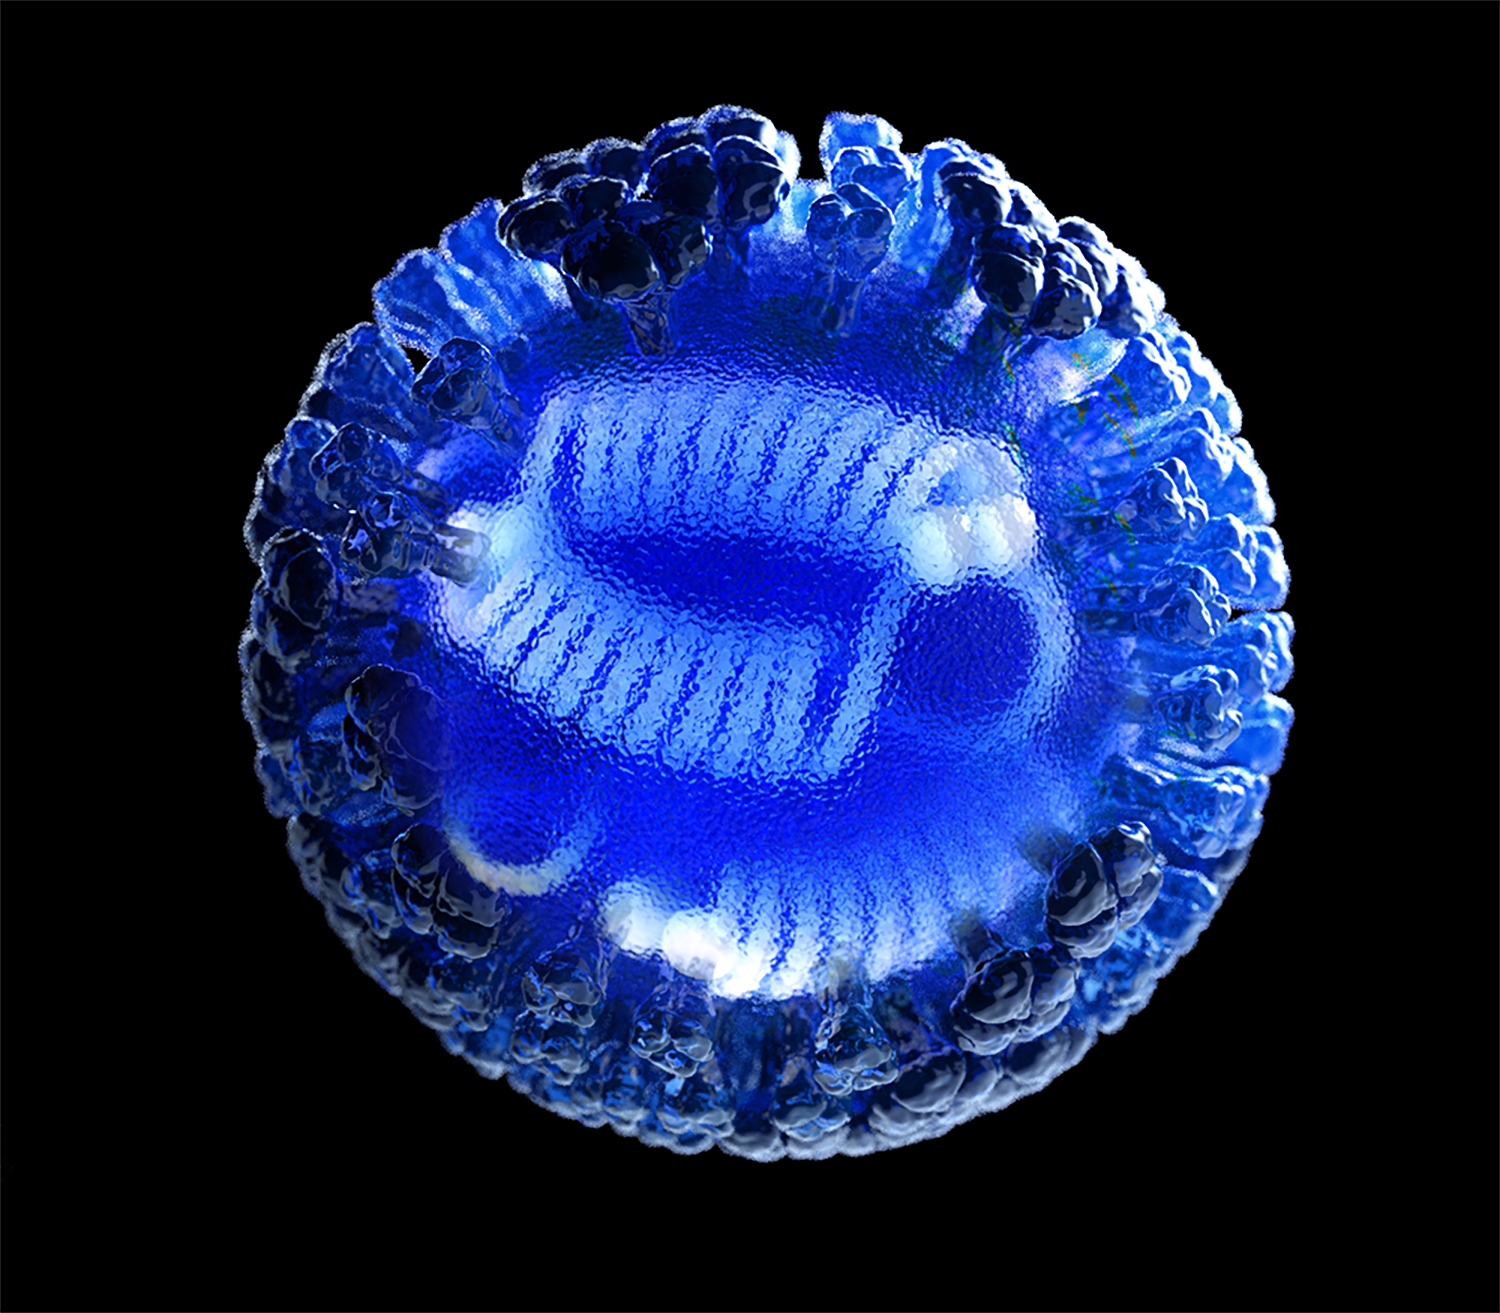 This illustration depicts a 3D computer-generated rendering of a whole influenza (flu) virus, rendered in semi-transparent blue, atop a black background. The transparent area in the center of the image, revealed the viral ribonucleoproteins (RNPs) inside. (Credit: CDC/ Douglas Jordan)
